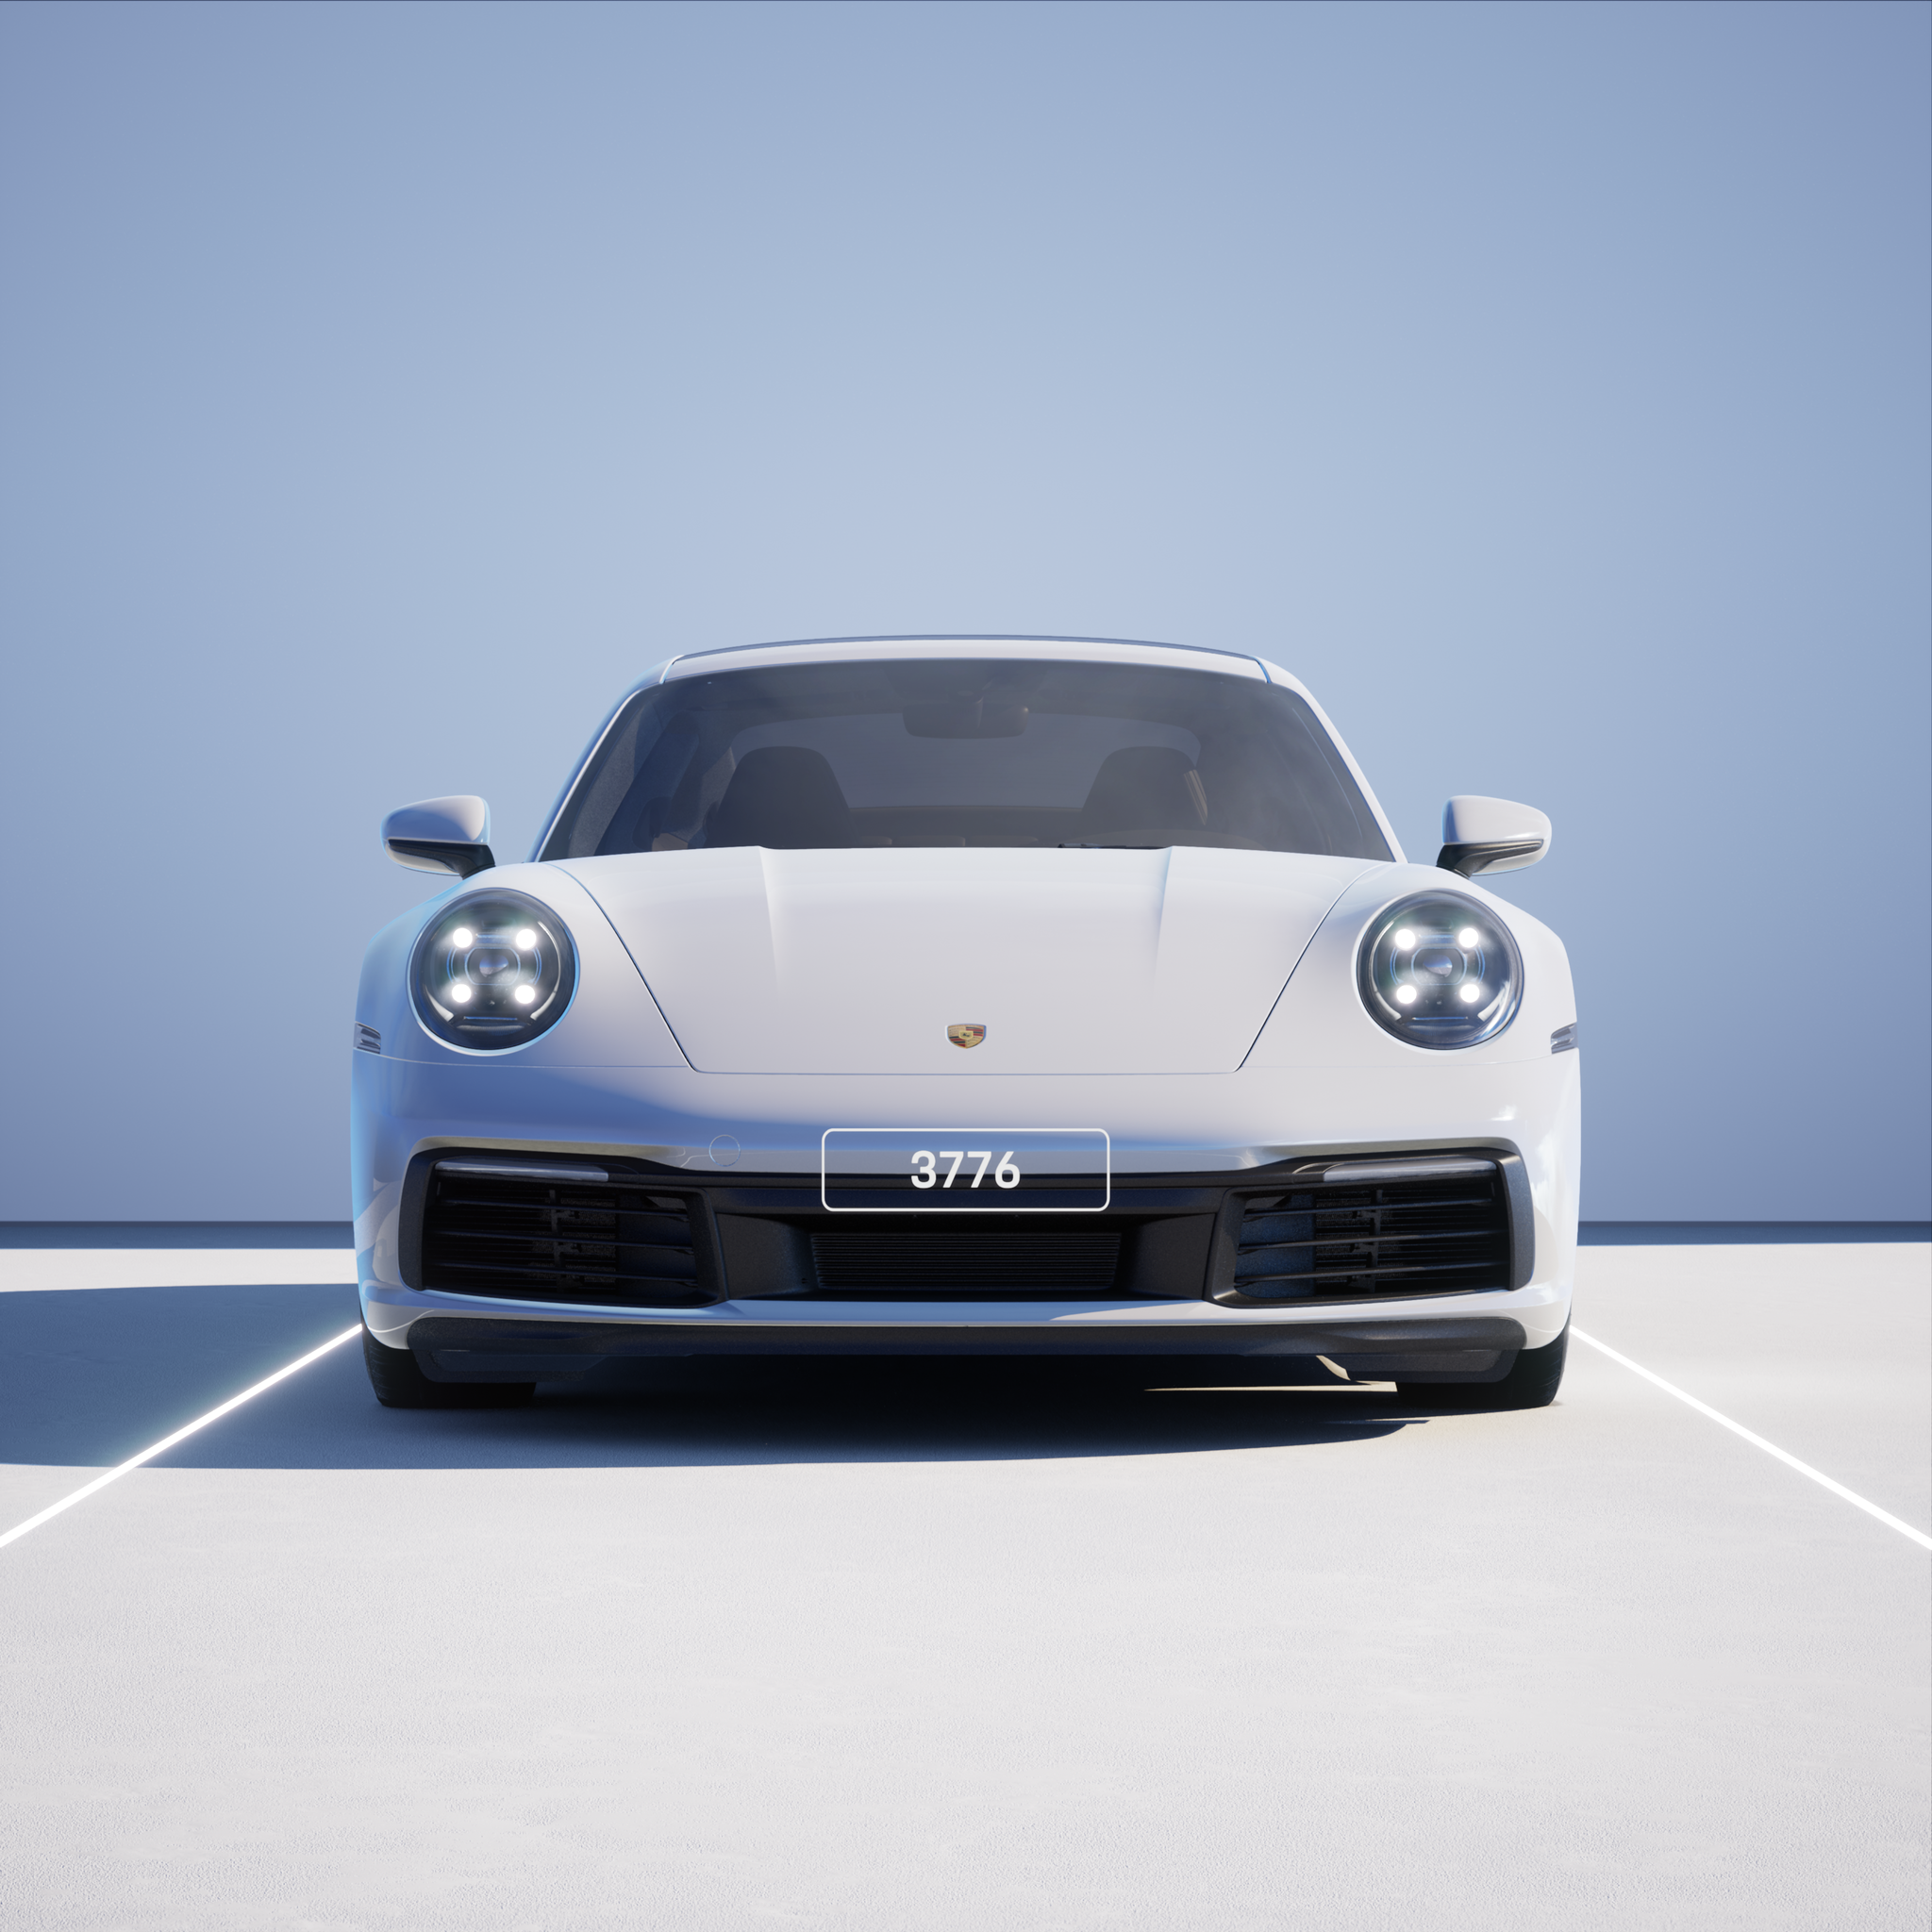 The PORSCHΞ 911 3776 image in phase